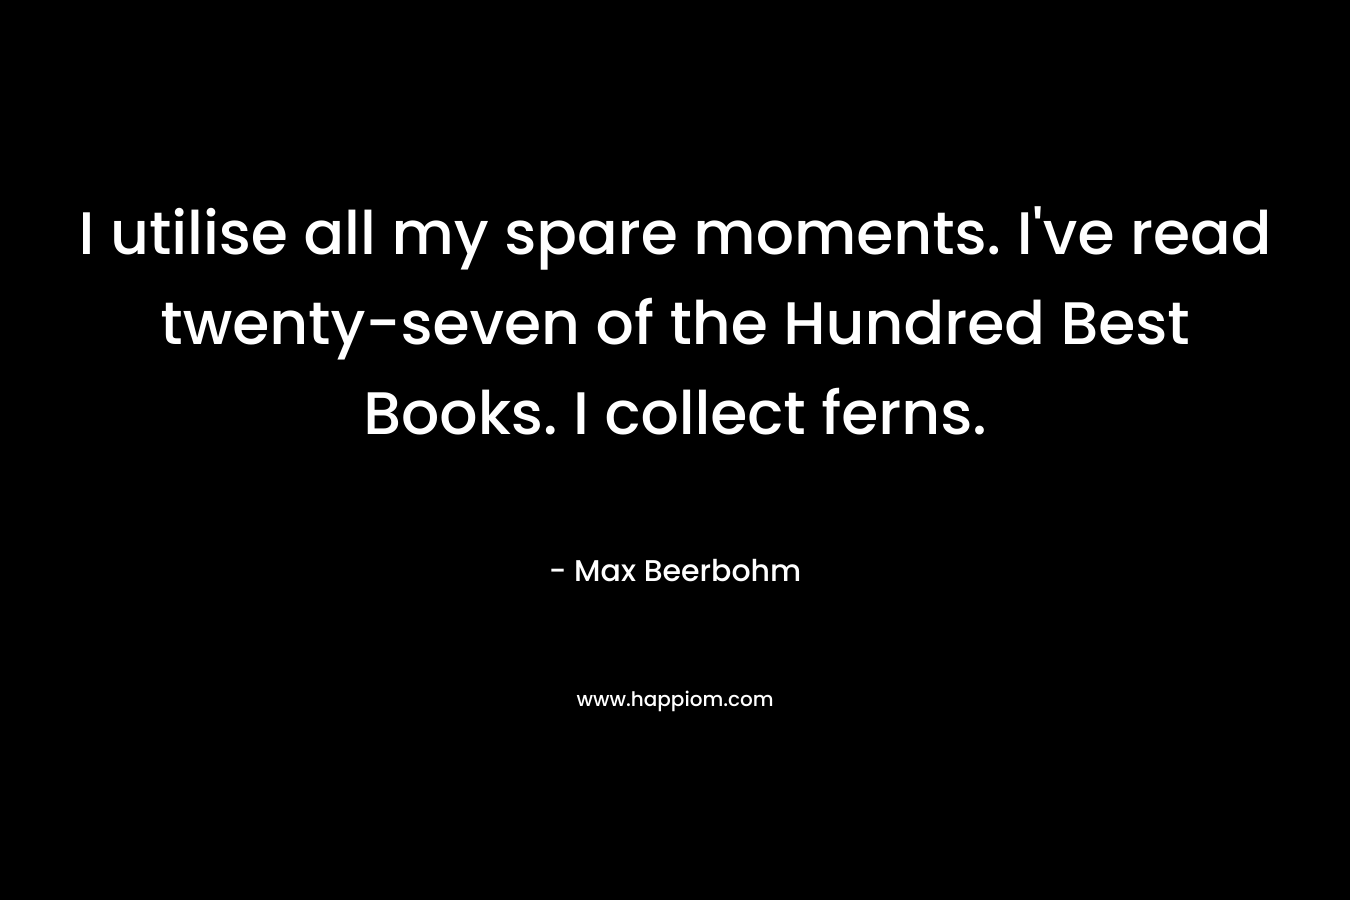 I utilise all my spare moments. I’ve read twenty-seven of the Hundred Best Books. I collect ferns. – Max Beerbohm